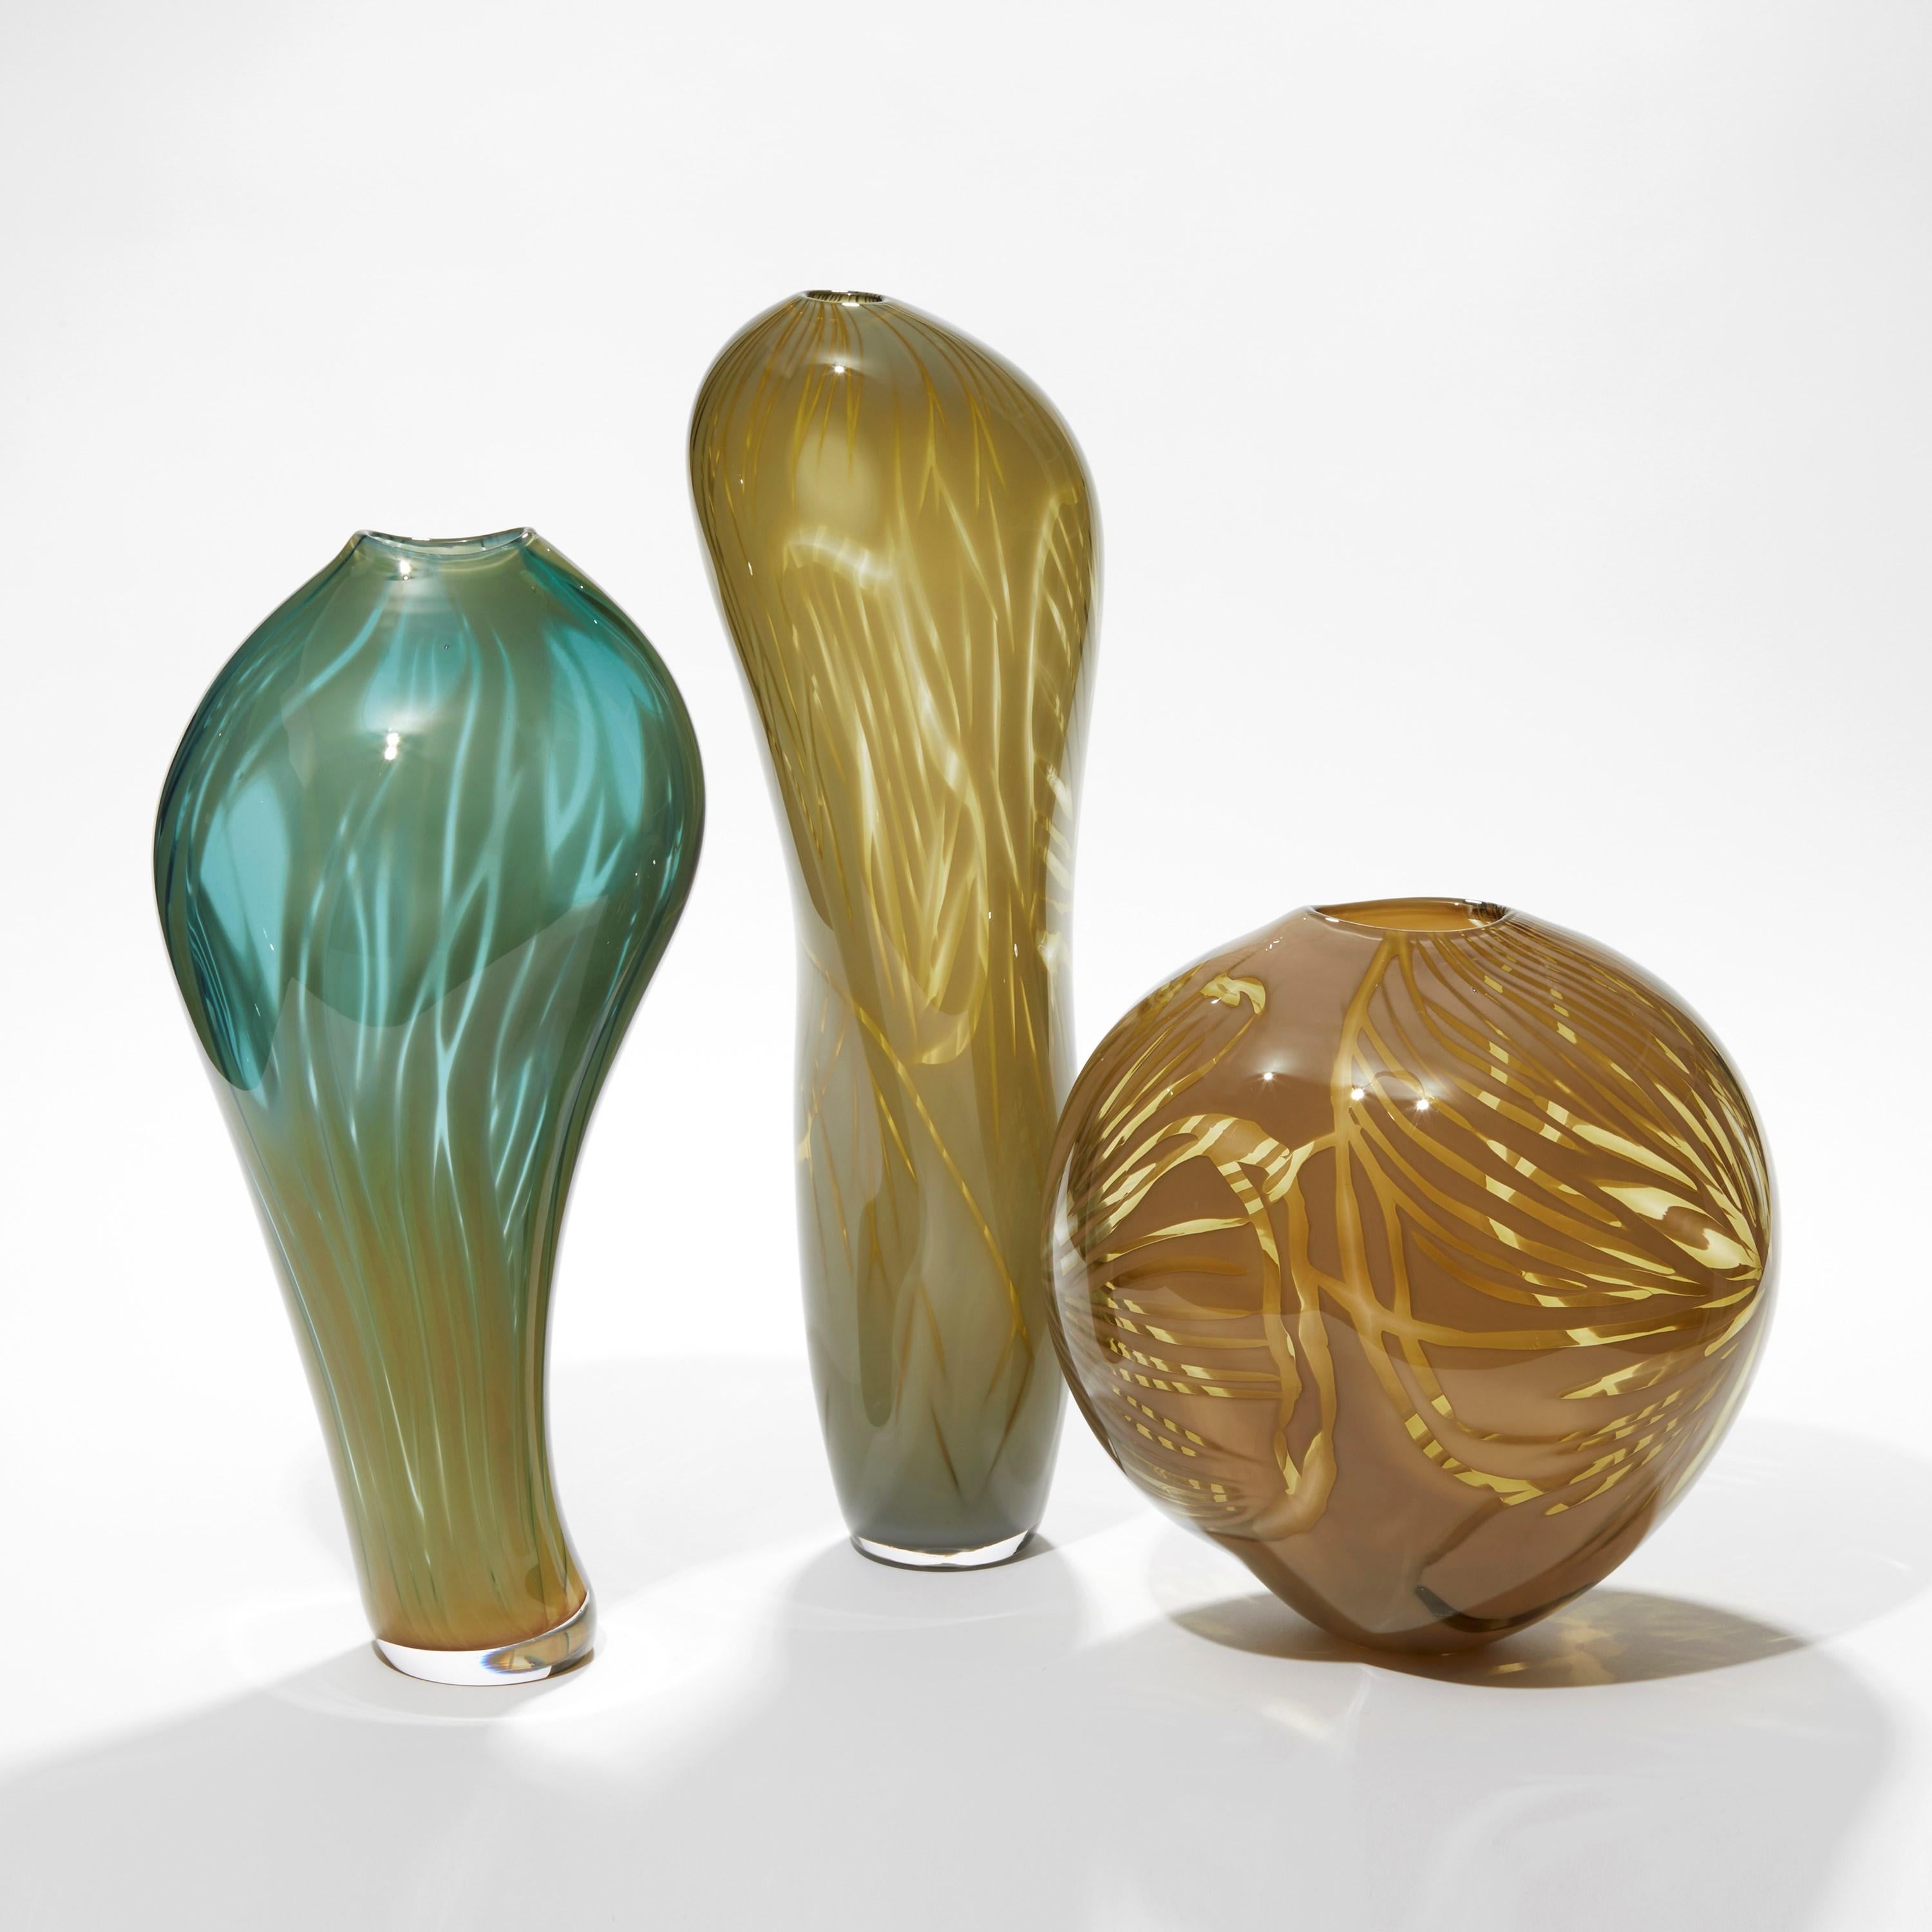 Contemporary Mexican Root, Ochre / Dark Tan Hand Blown Sculptural Vase by Michèle Oberdieck